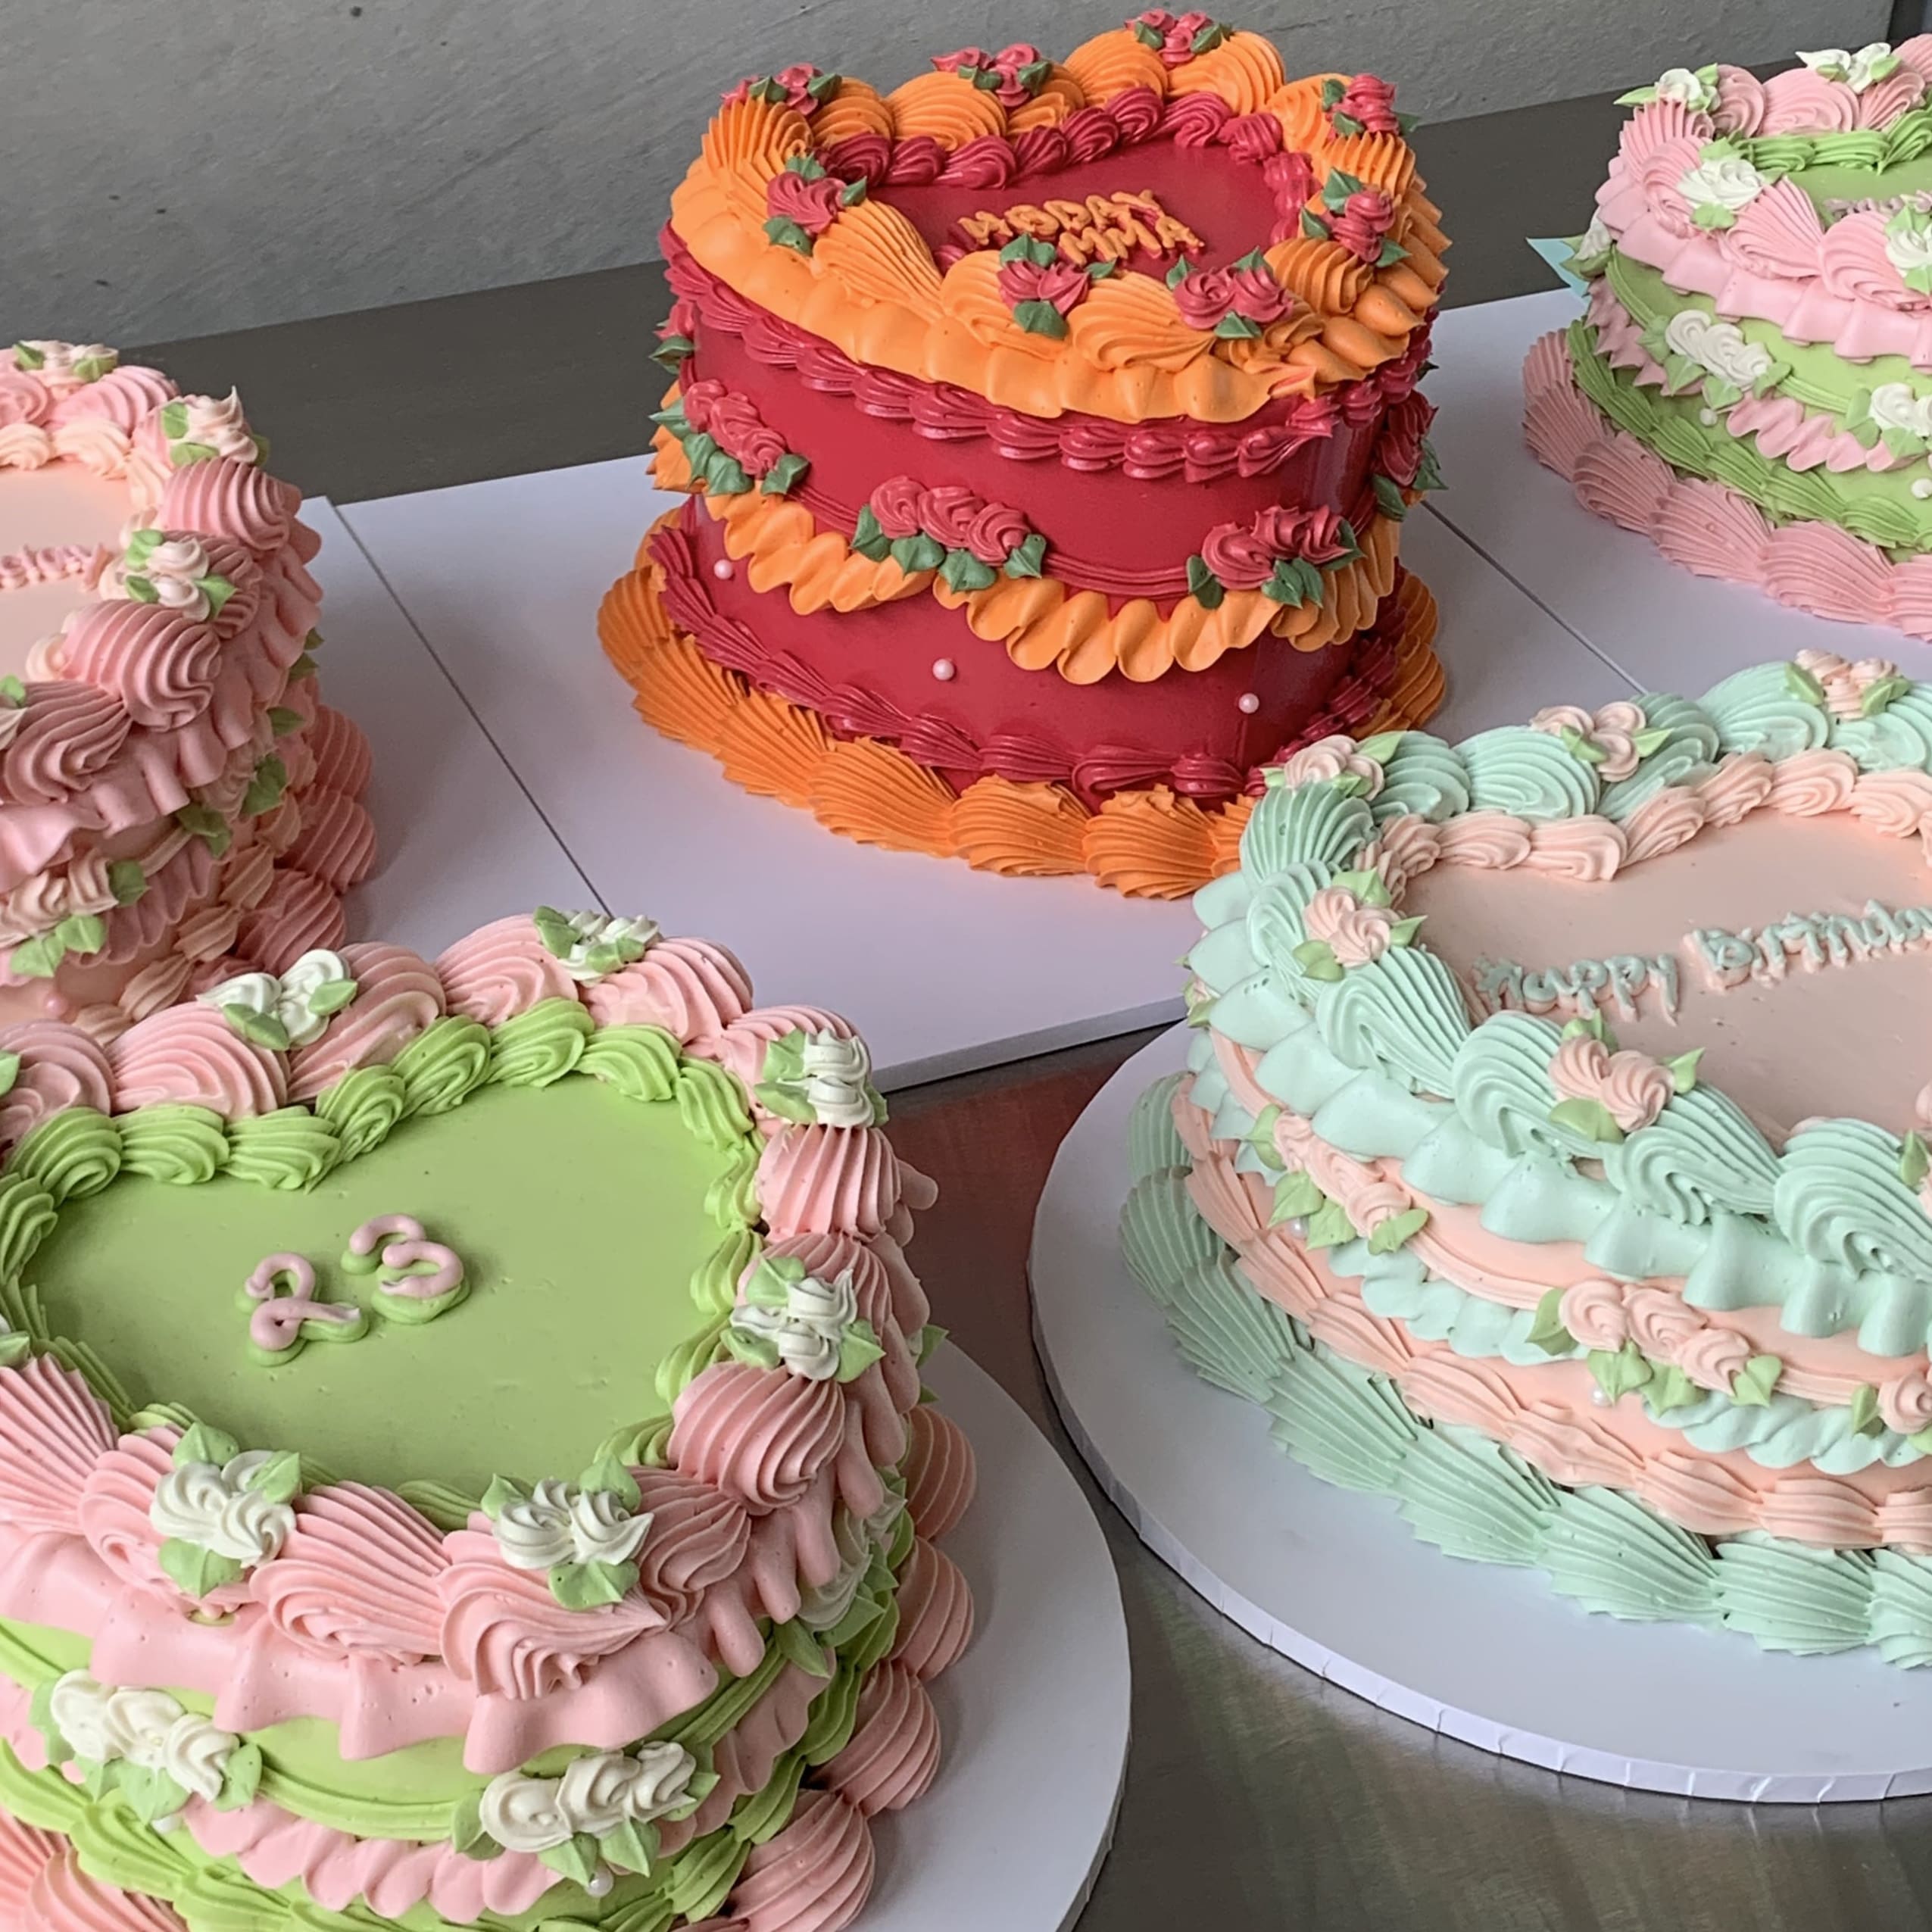 Auckland Cake Art – Designed to be different